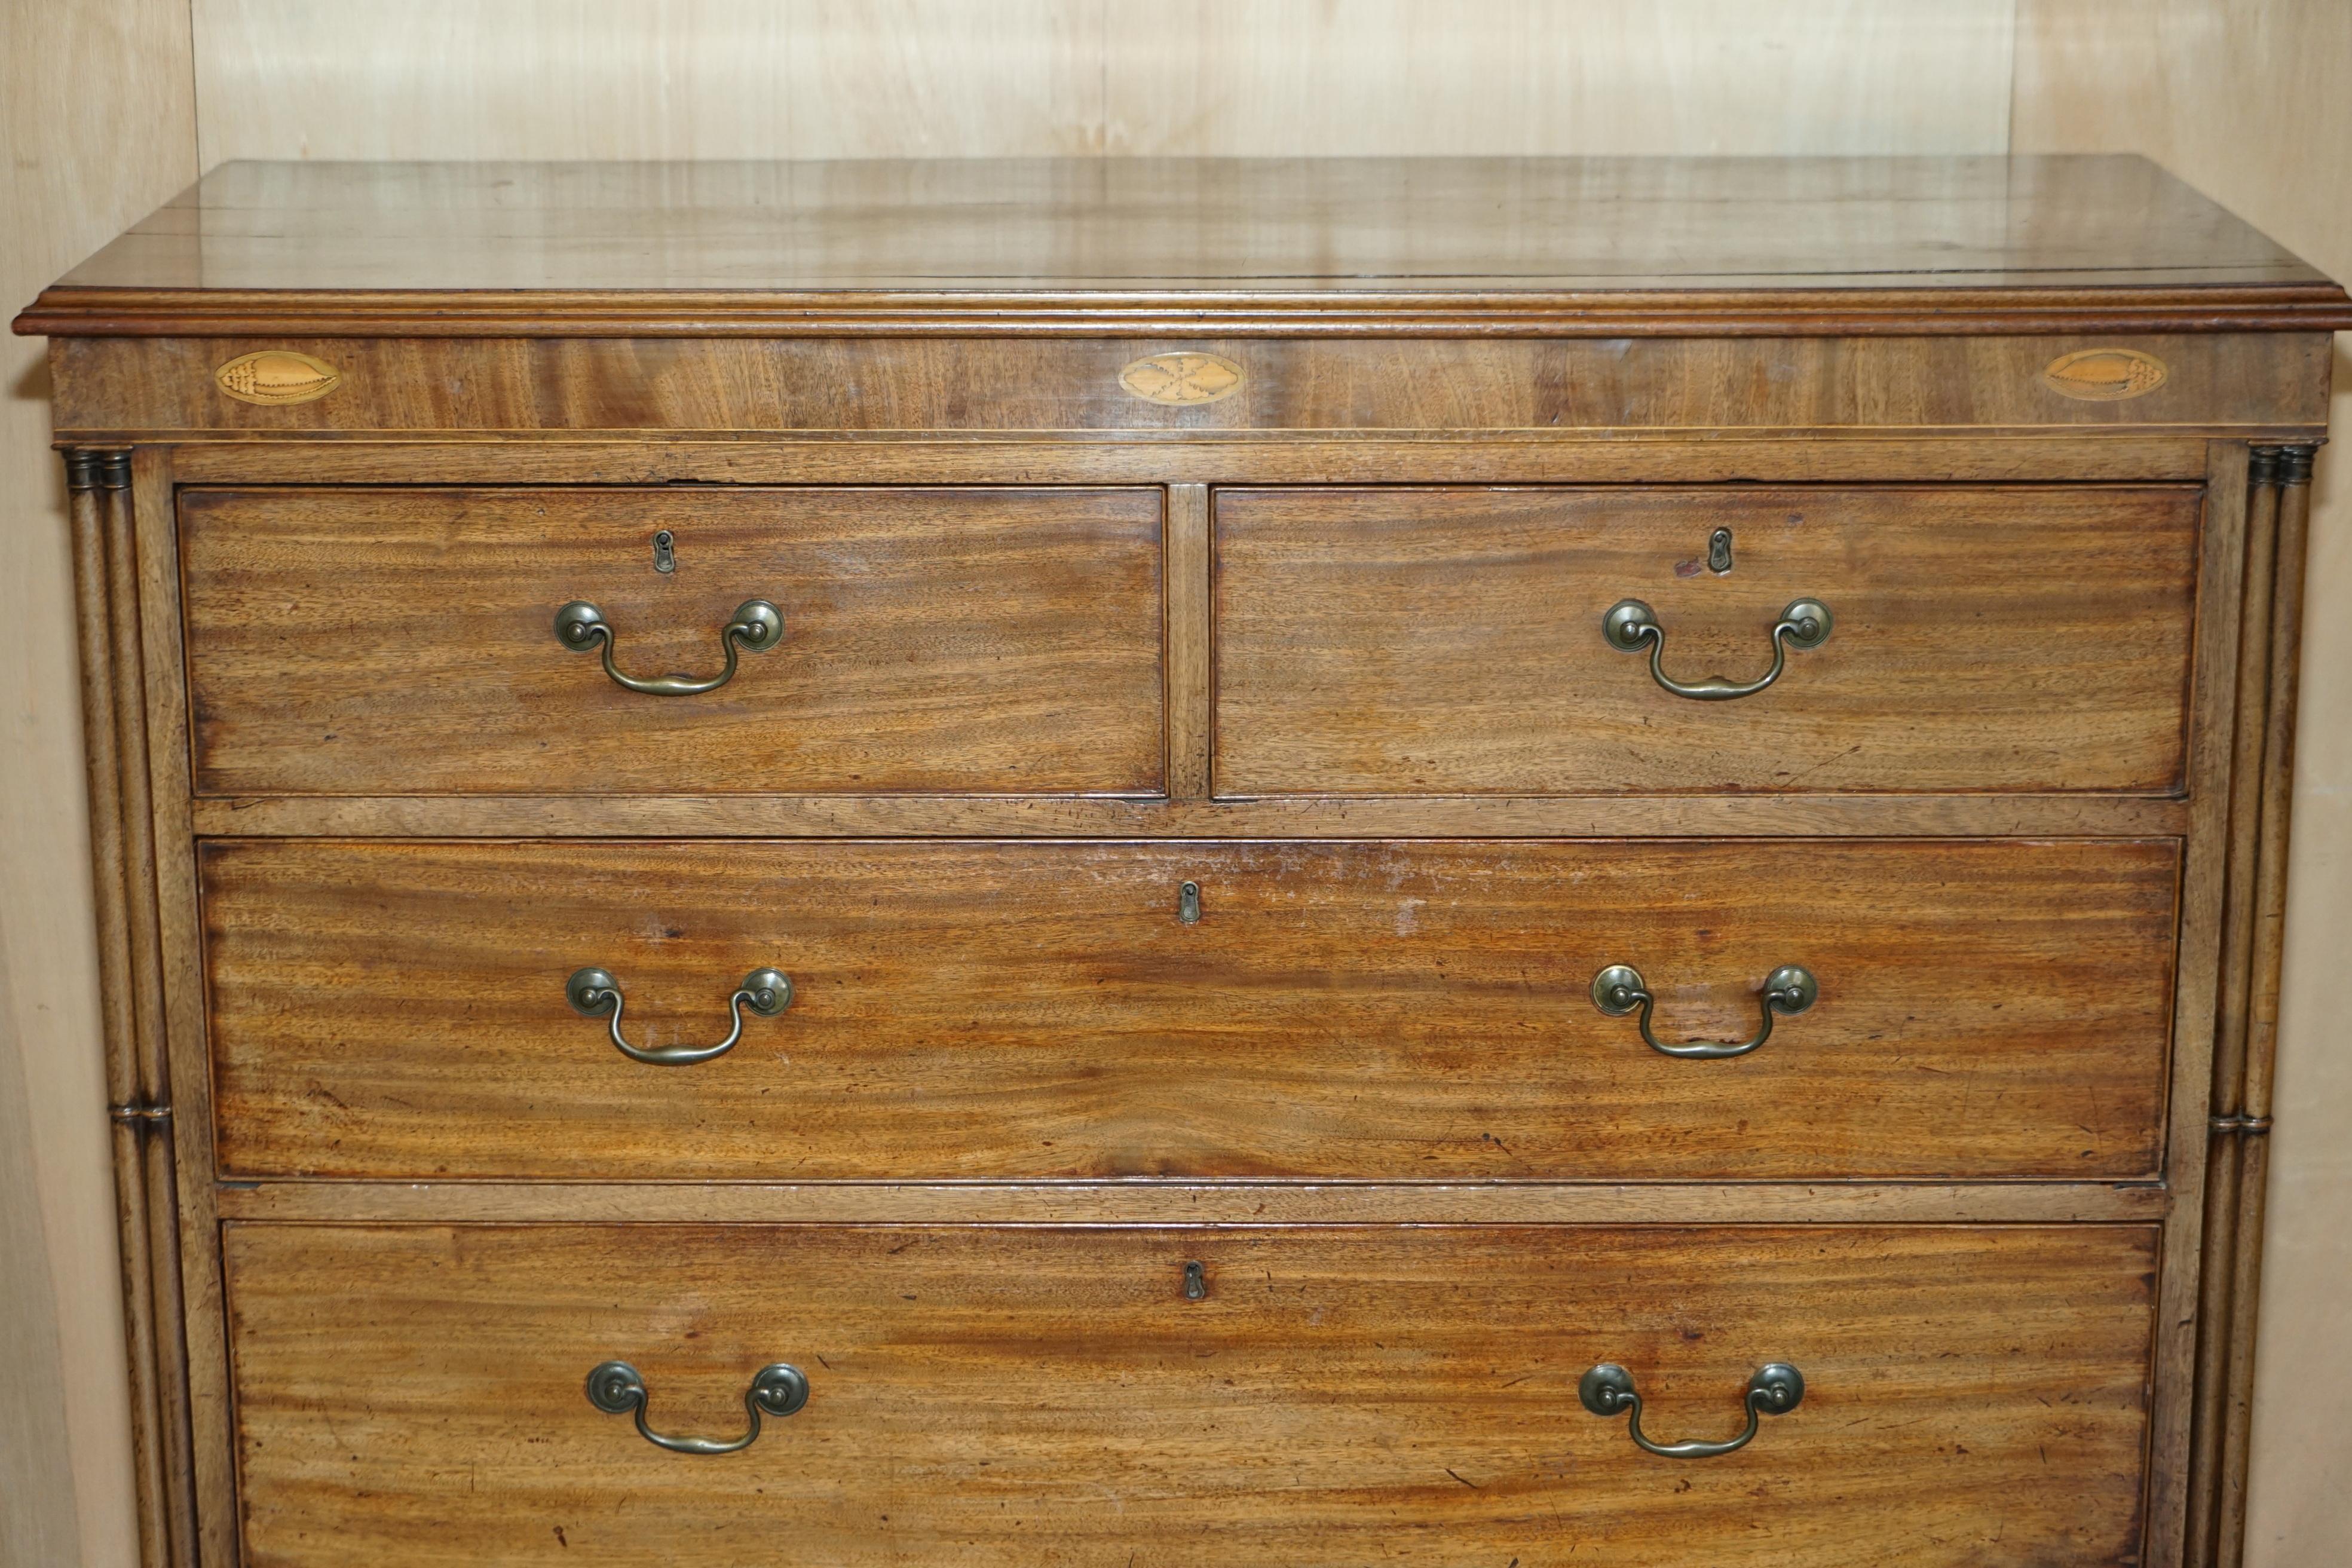 LARGE FiNE ANTIQUE THOMAS CHIPPENDALE SHERATON REVIVAL HARDWOOD CHEST OF DRAWERS im Angebot 1